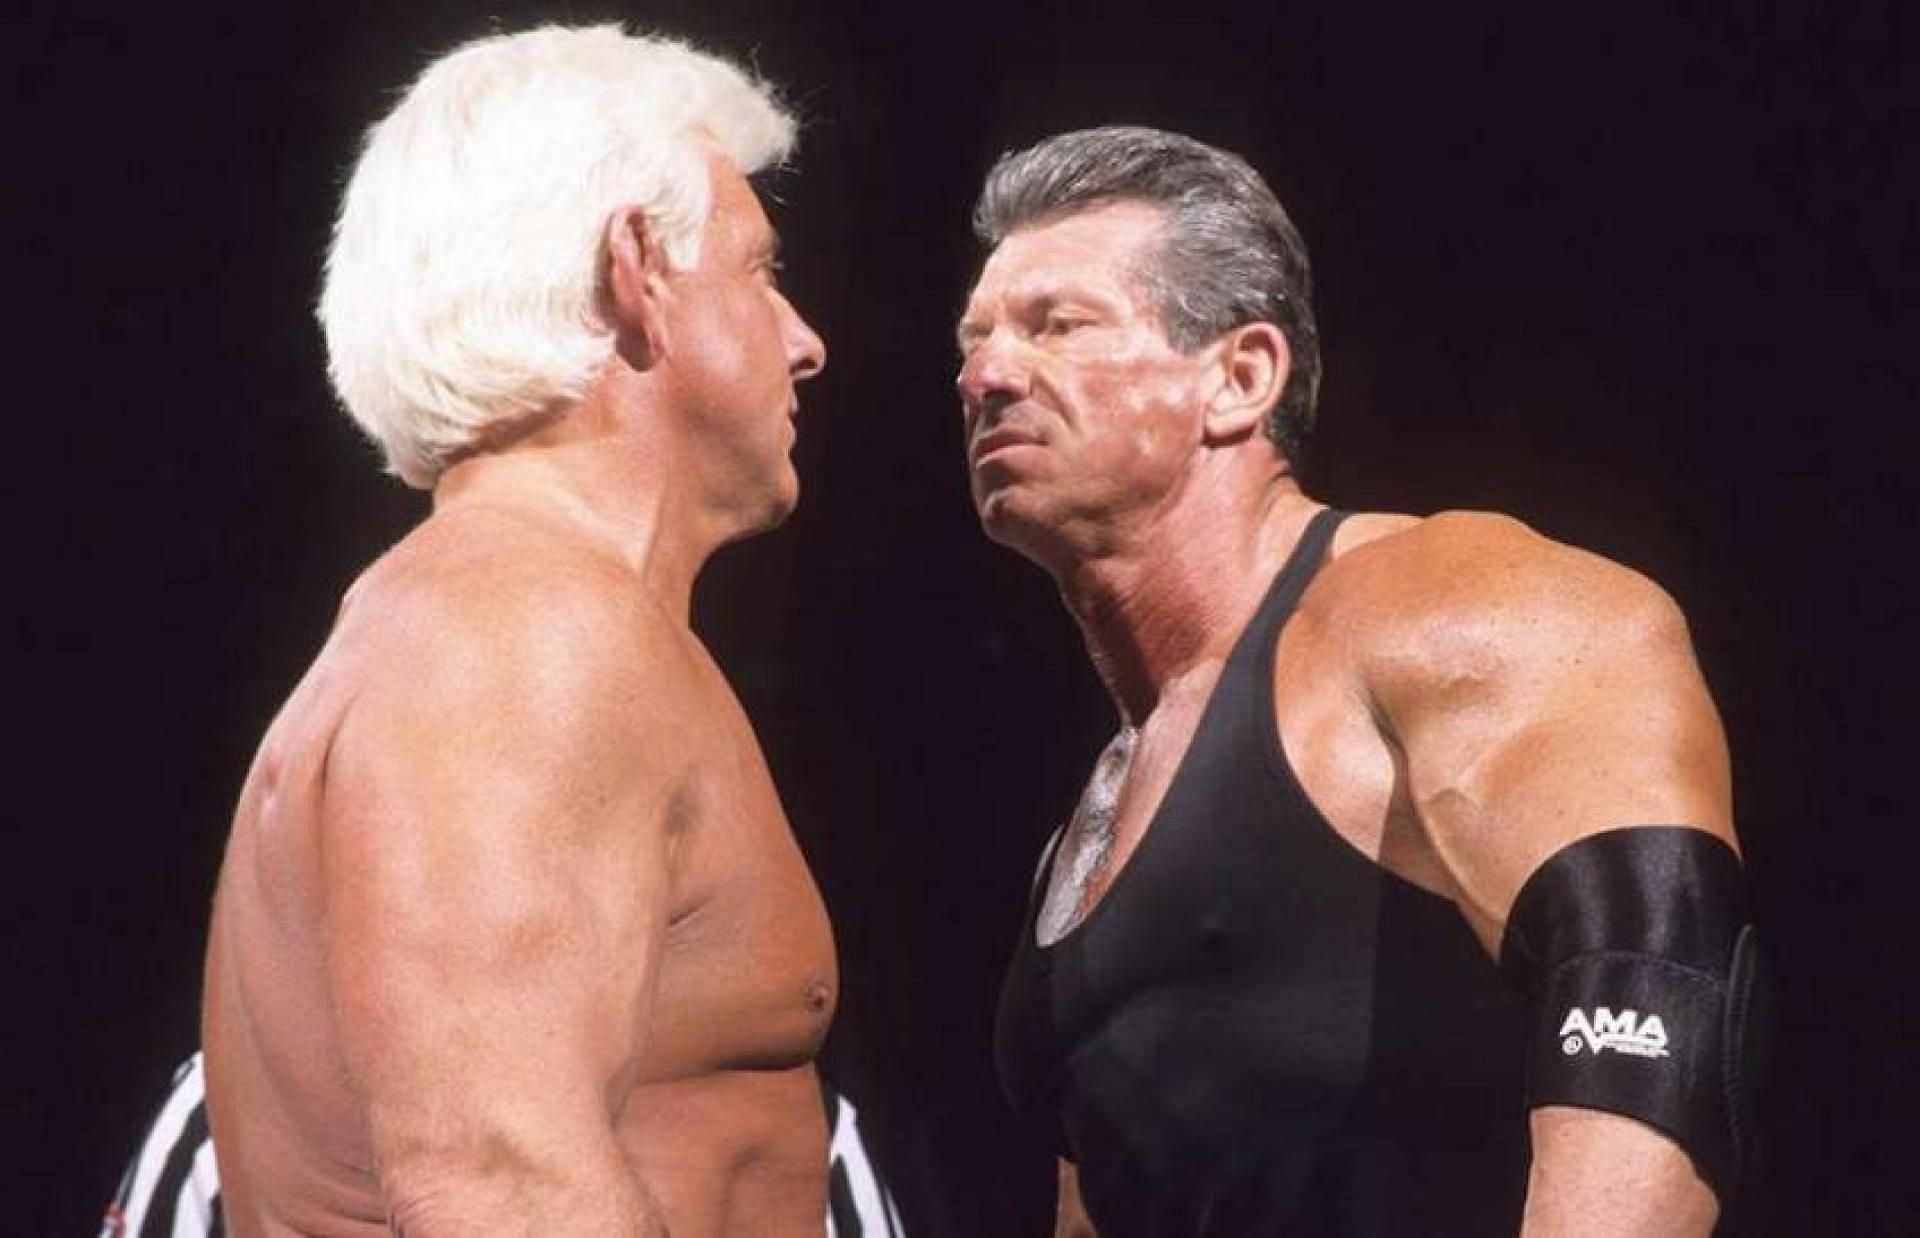 Vince McMahon helped out Ric Flair during a tough time.